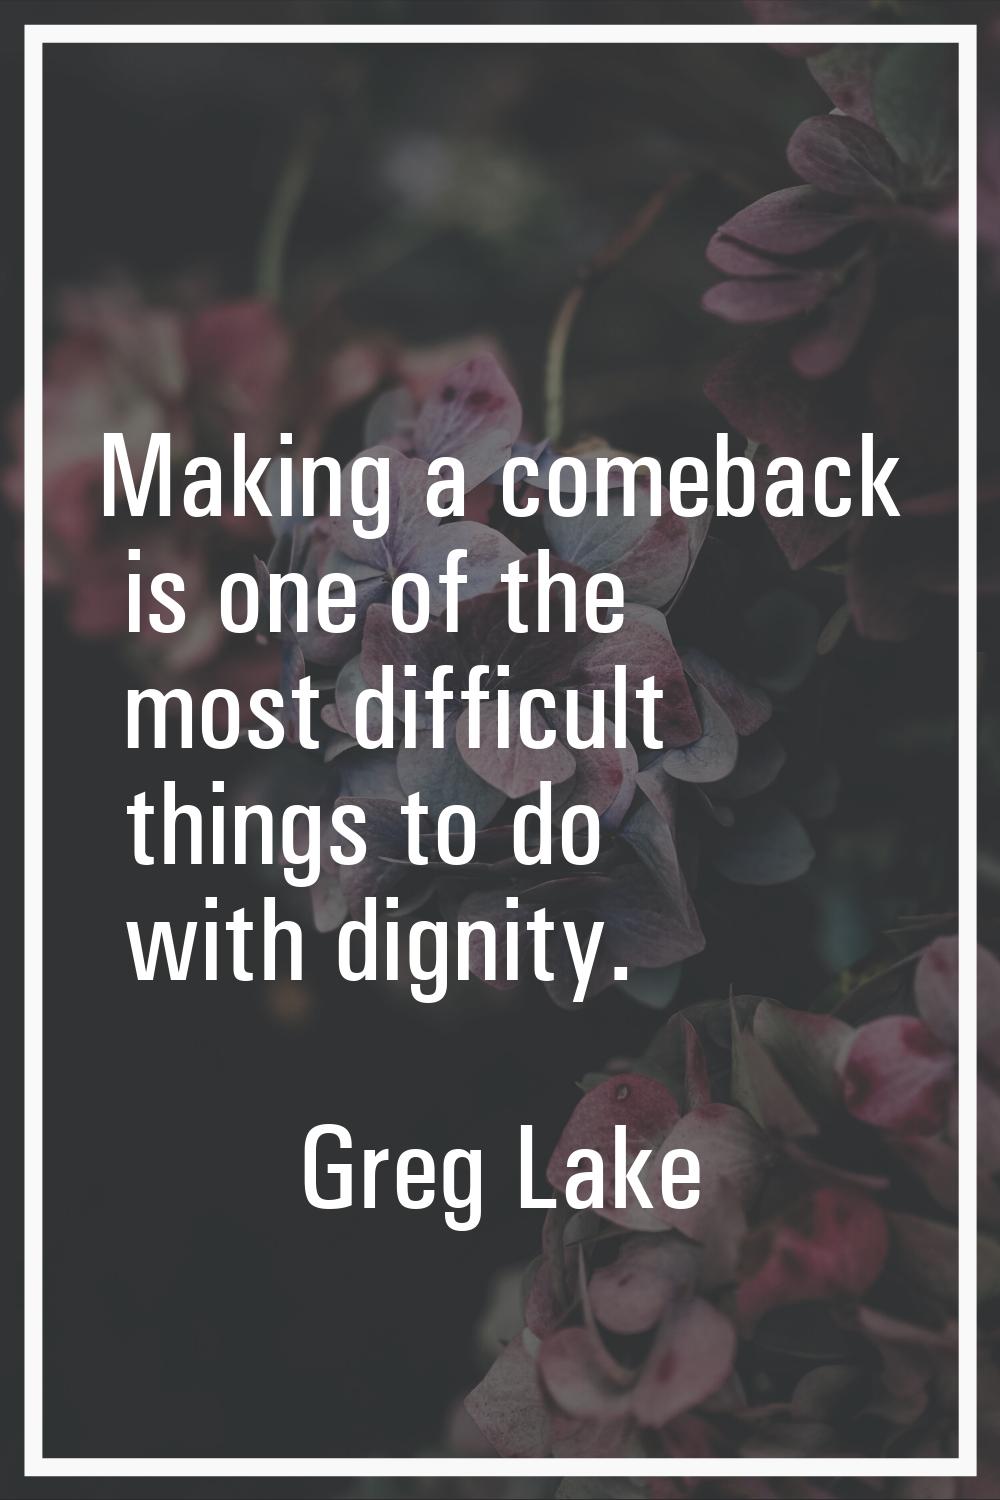 Making a comeback is one of the most difficult things to do with dignity.